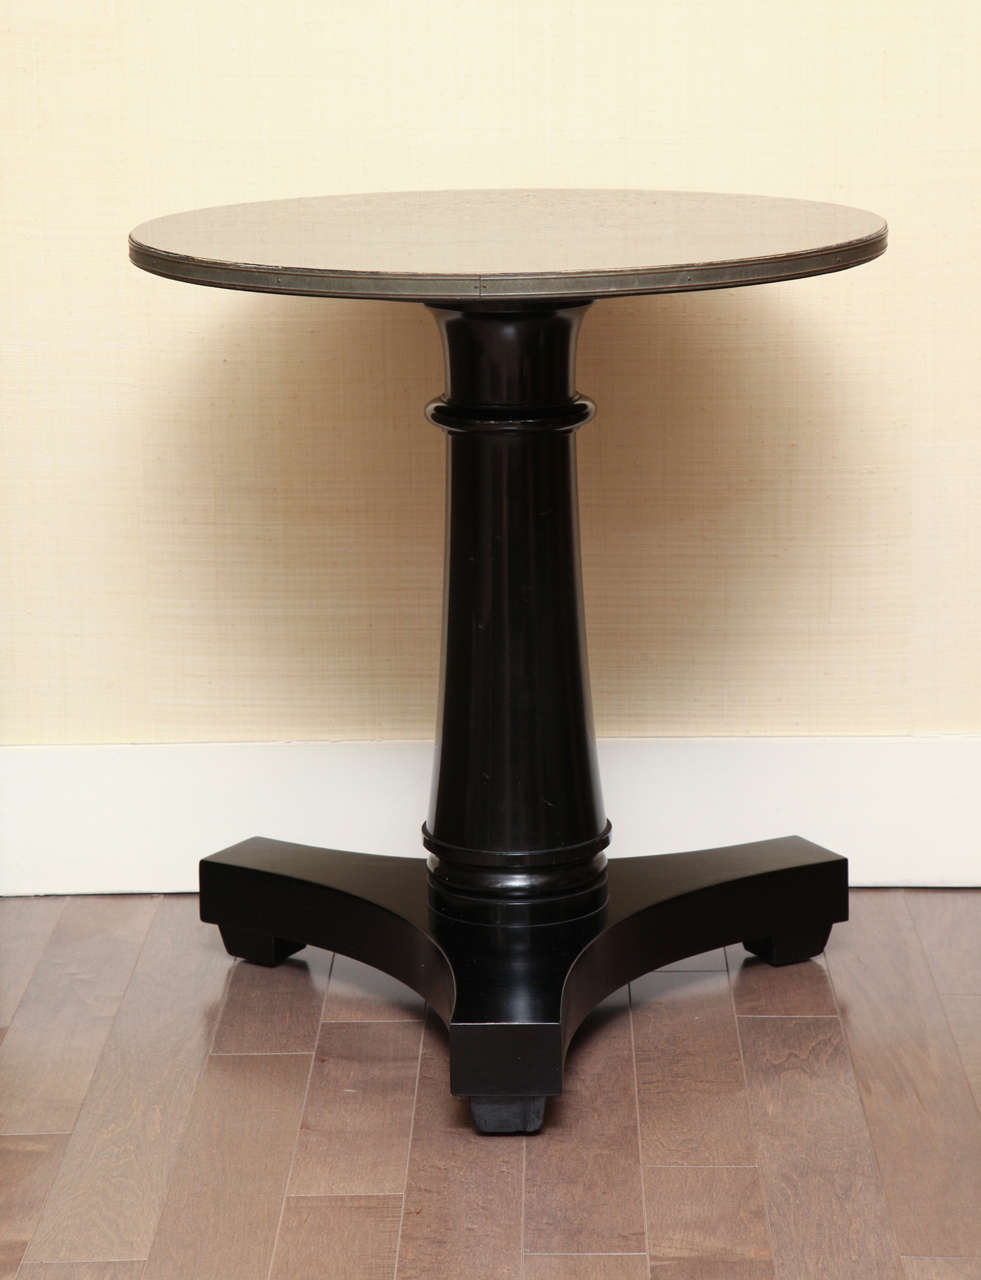 Black lacquer classical pedestal side table with brass trim, circa 1960s.